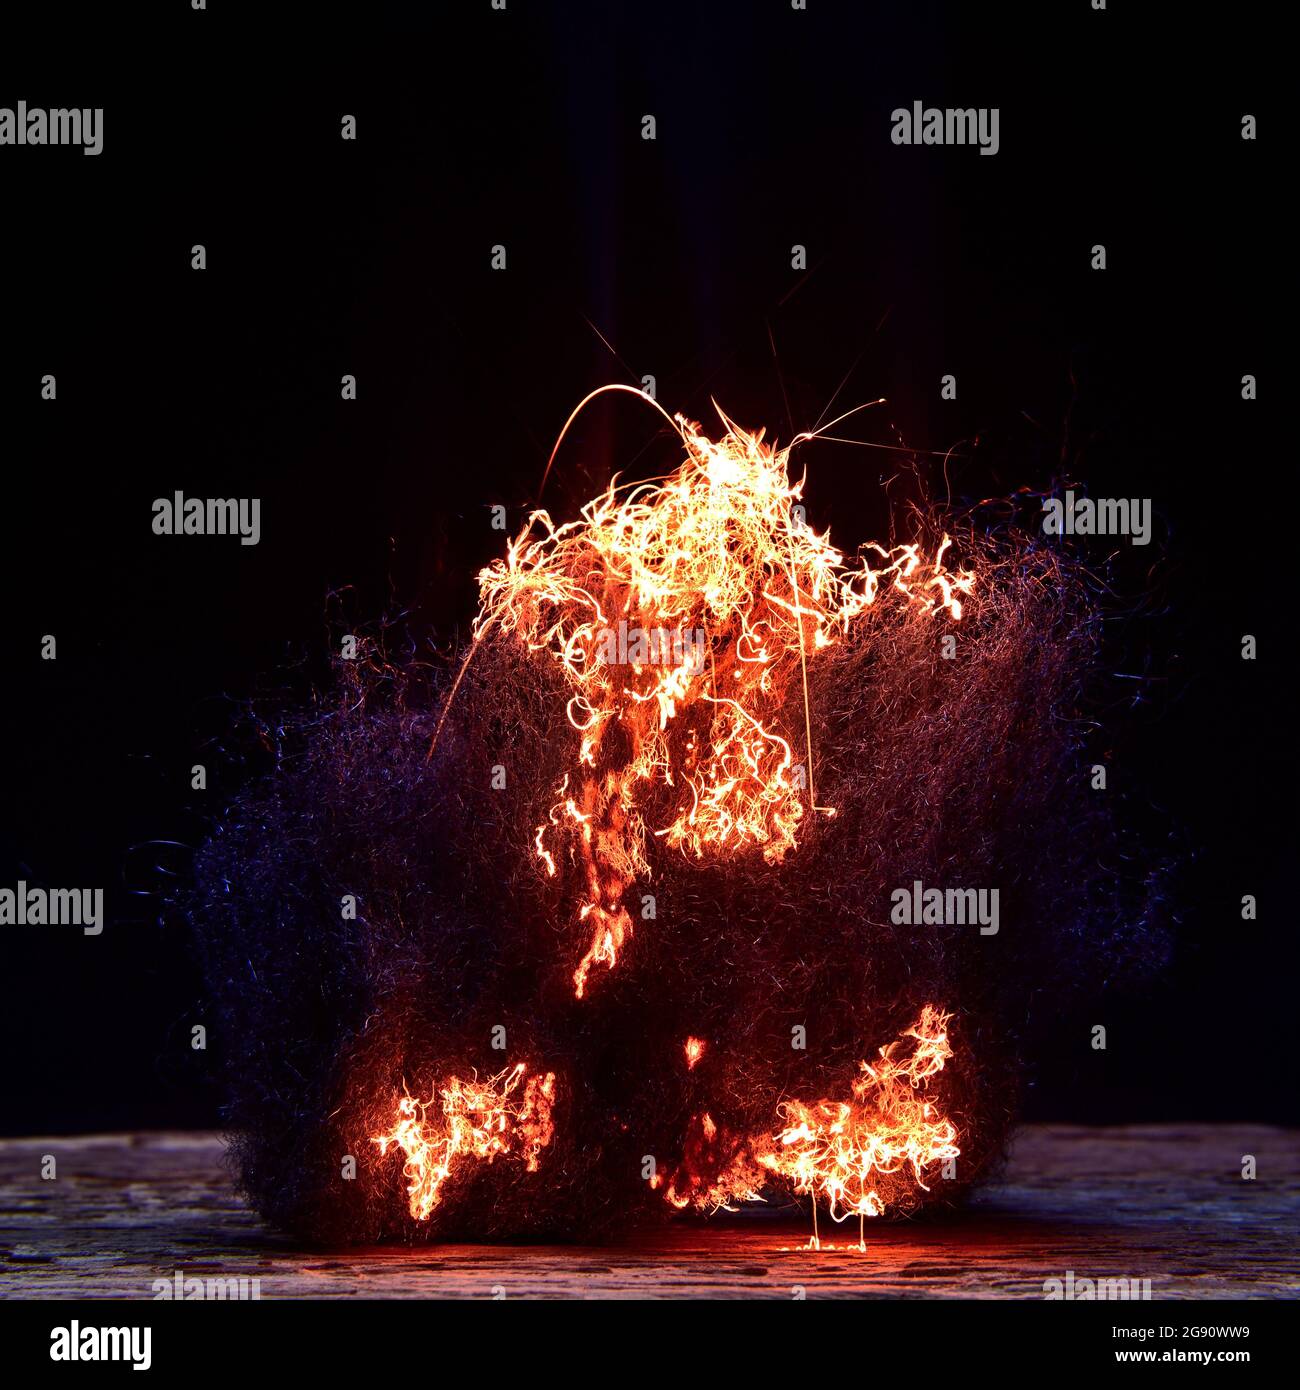 Sparkling steel wool on fire Stock Photo